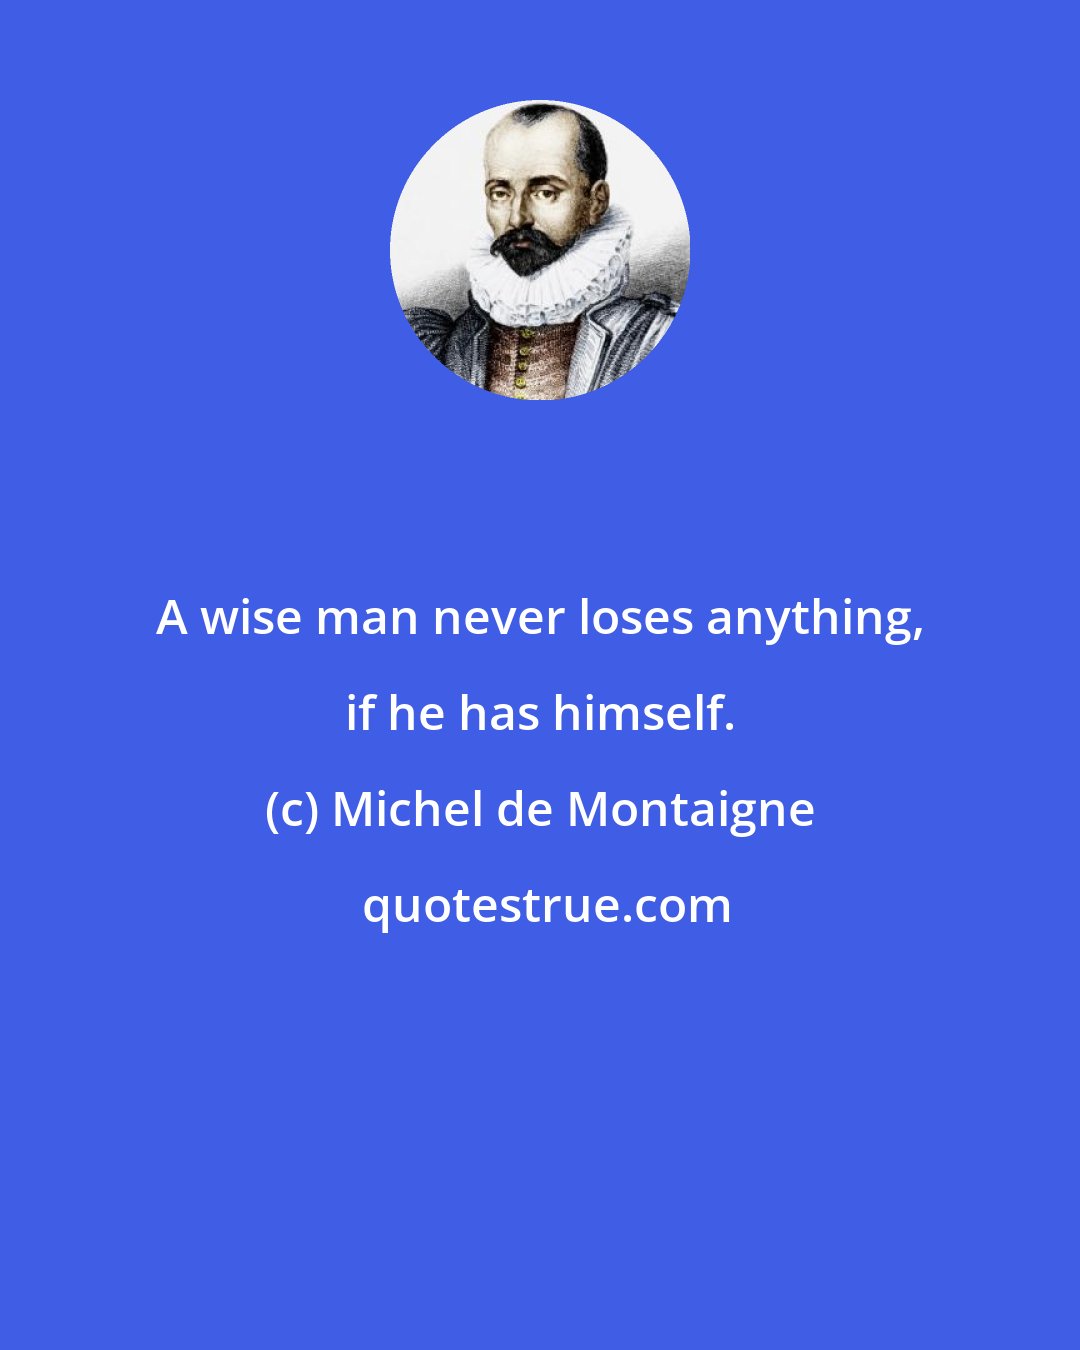 Michel de Montaigne: A wise man never loses anything, if he has himself.